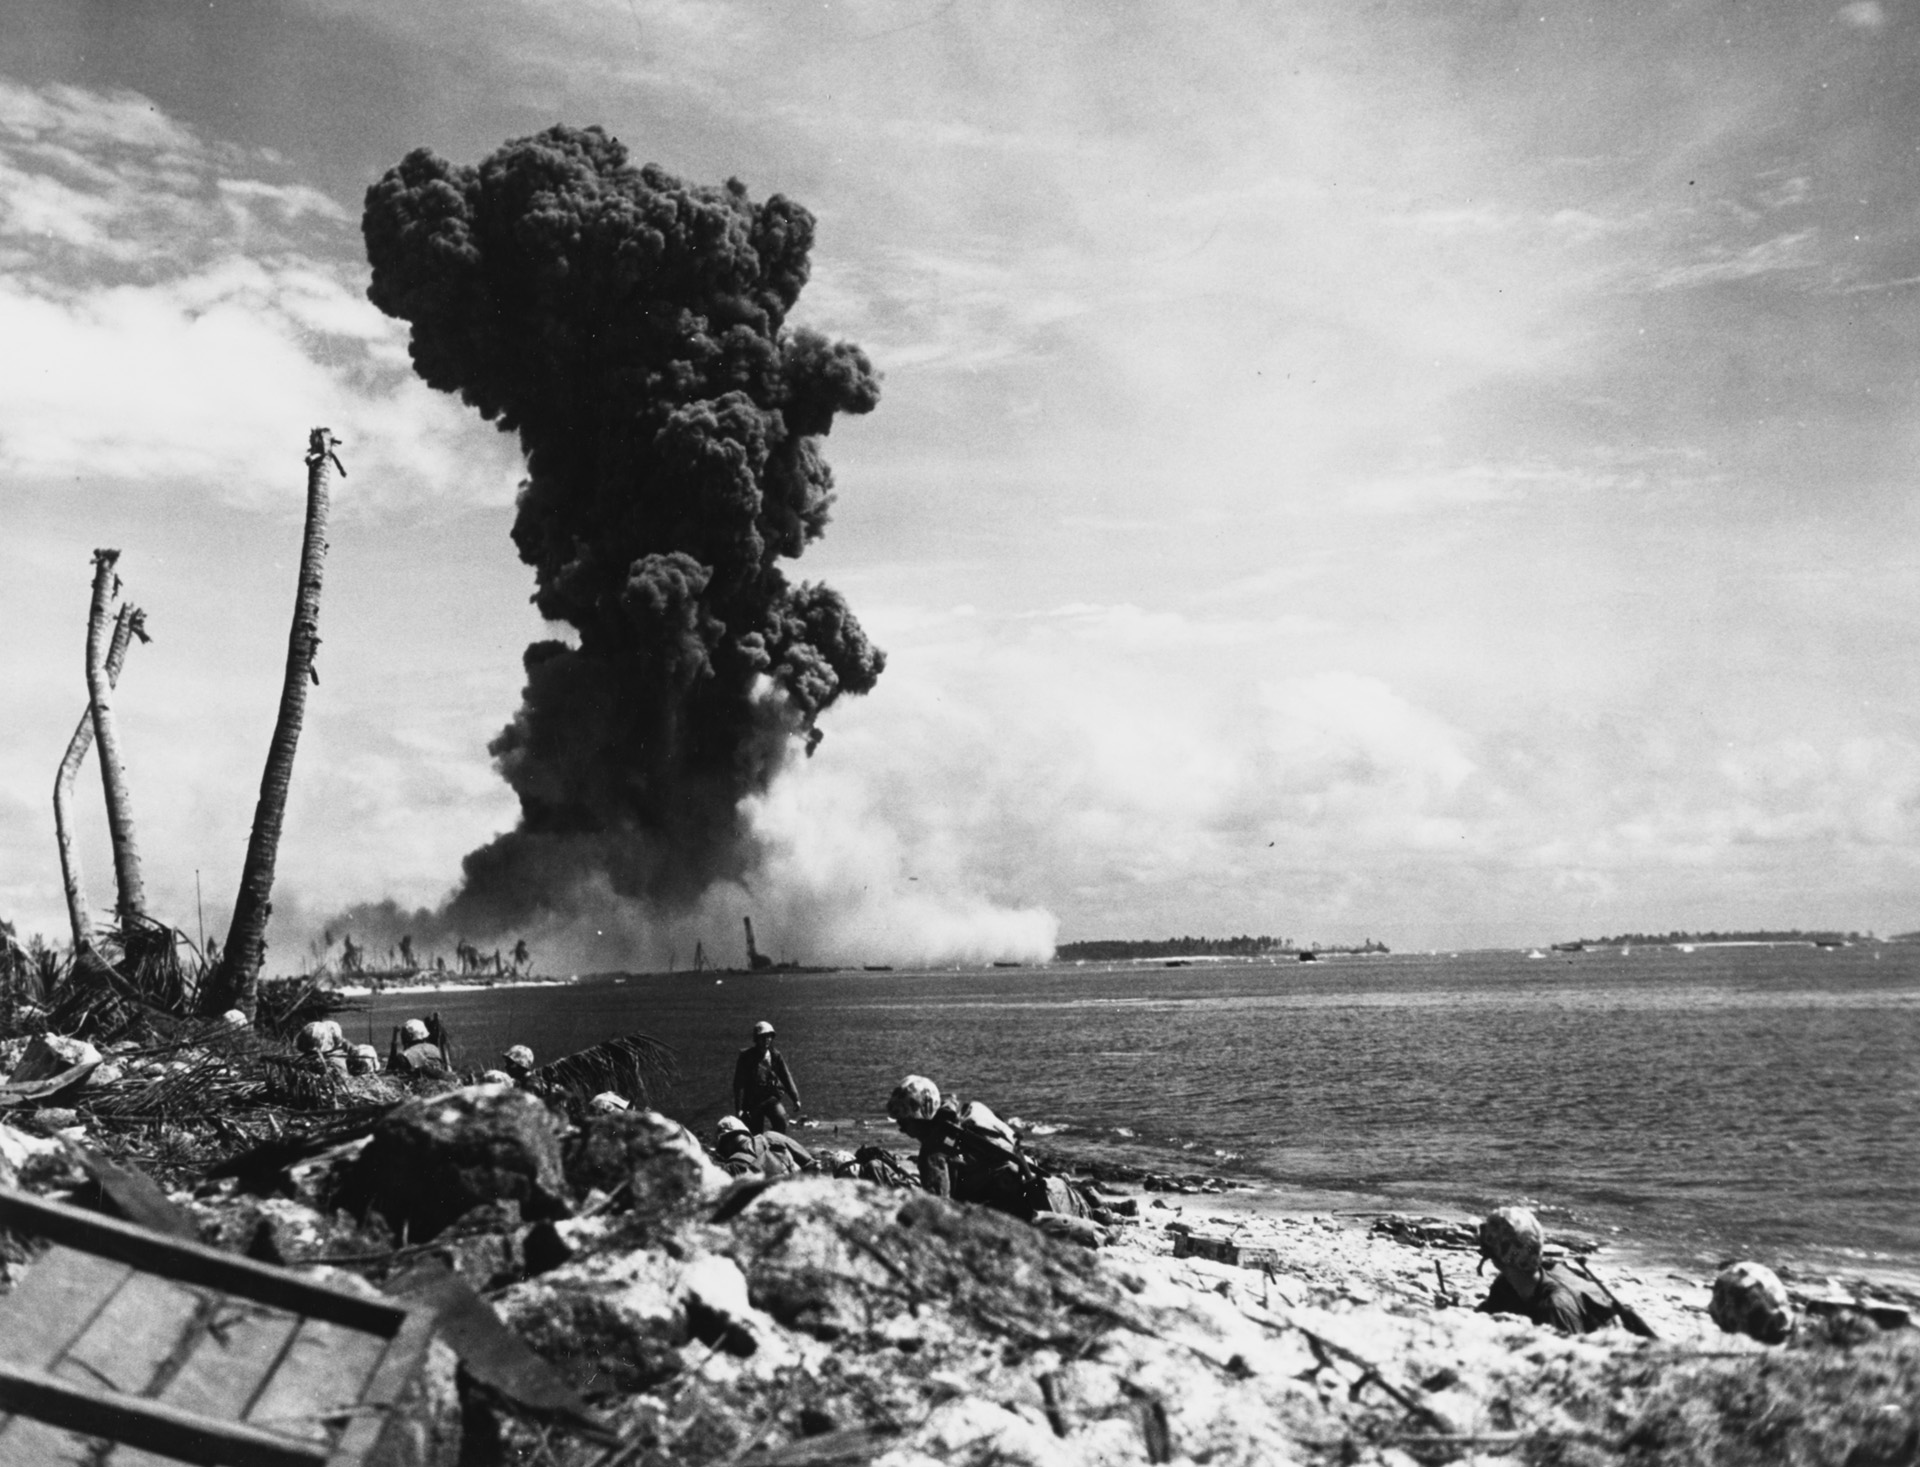 A huge explosion shakes the beach at Kwajalein during the combined Marine-Army November 1943 invasion of the Gilbert and Marshall Islands. Kwajalein, Roi-Namur, and Eniwetok were especially well fortified by the Japanese.